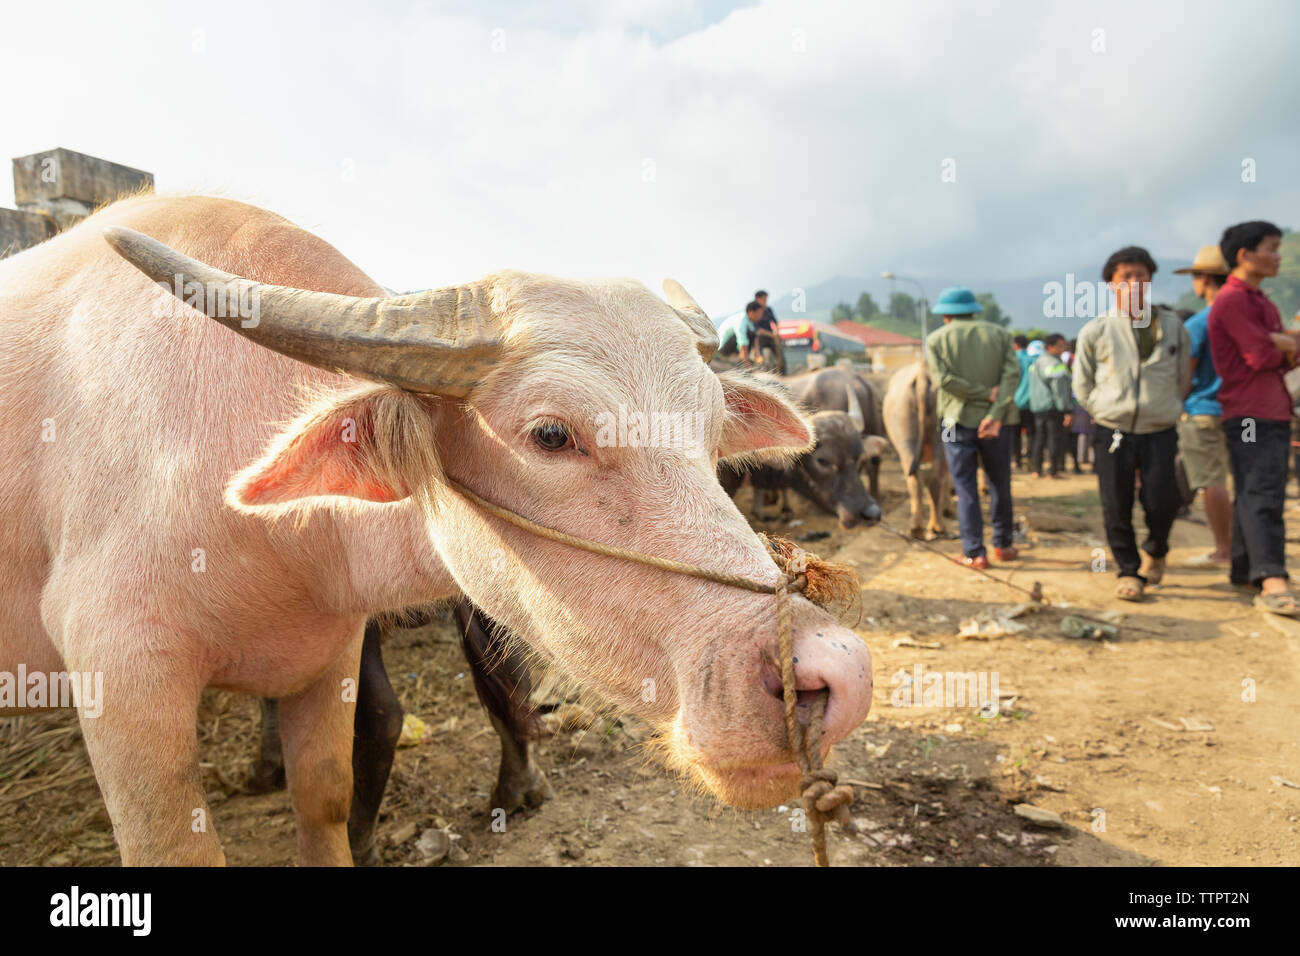 Albino Water Buffalo High Resolution Stock Photography and Images - Alamy